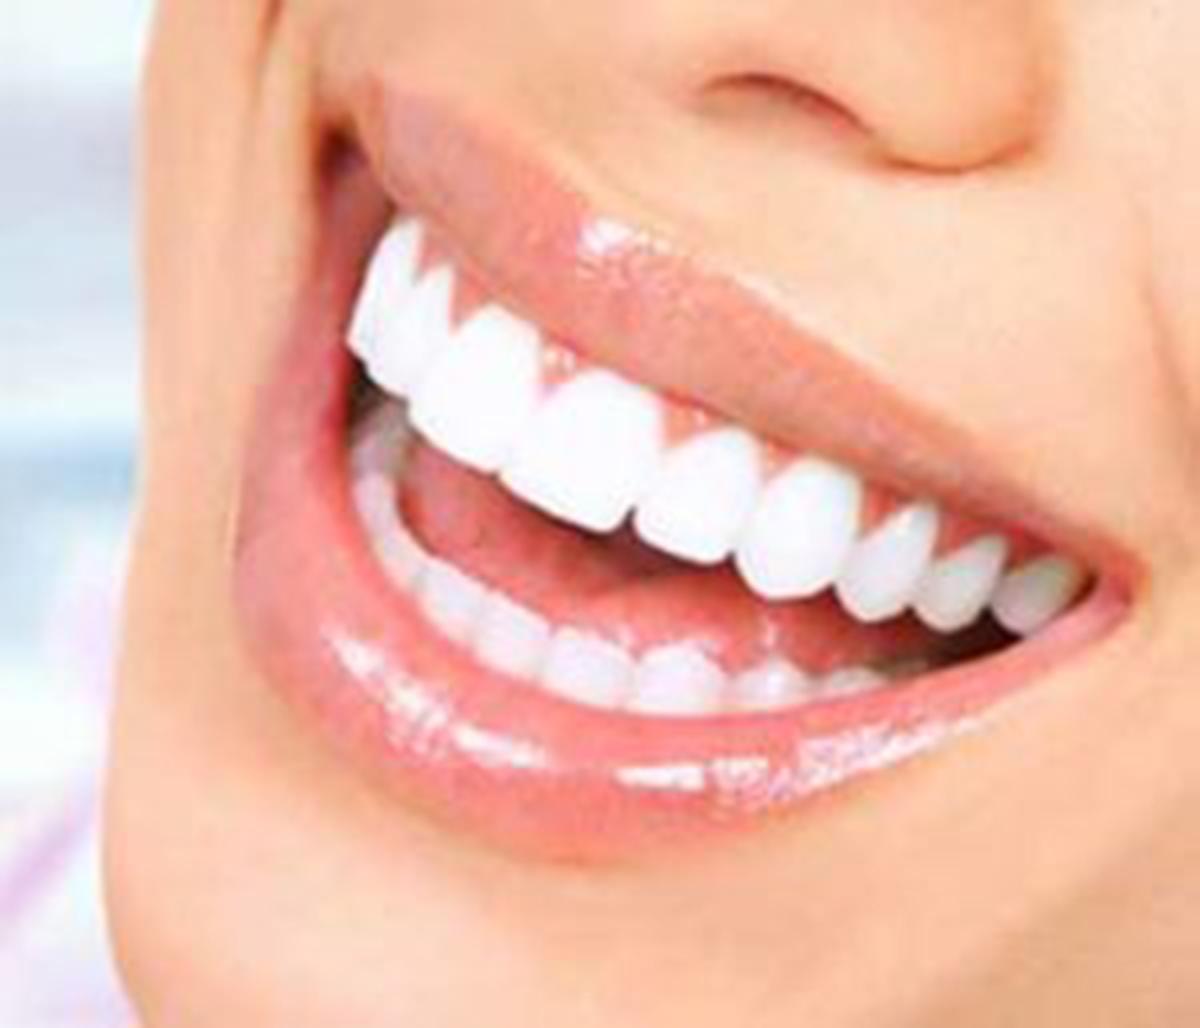 In San Francisco, CA, Dr. Terri Nguyen and Dr. Laura Huynh of West Portal Family Dentistry offer cosmetic dental care including porcelain veneers to enhance your smile.